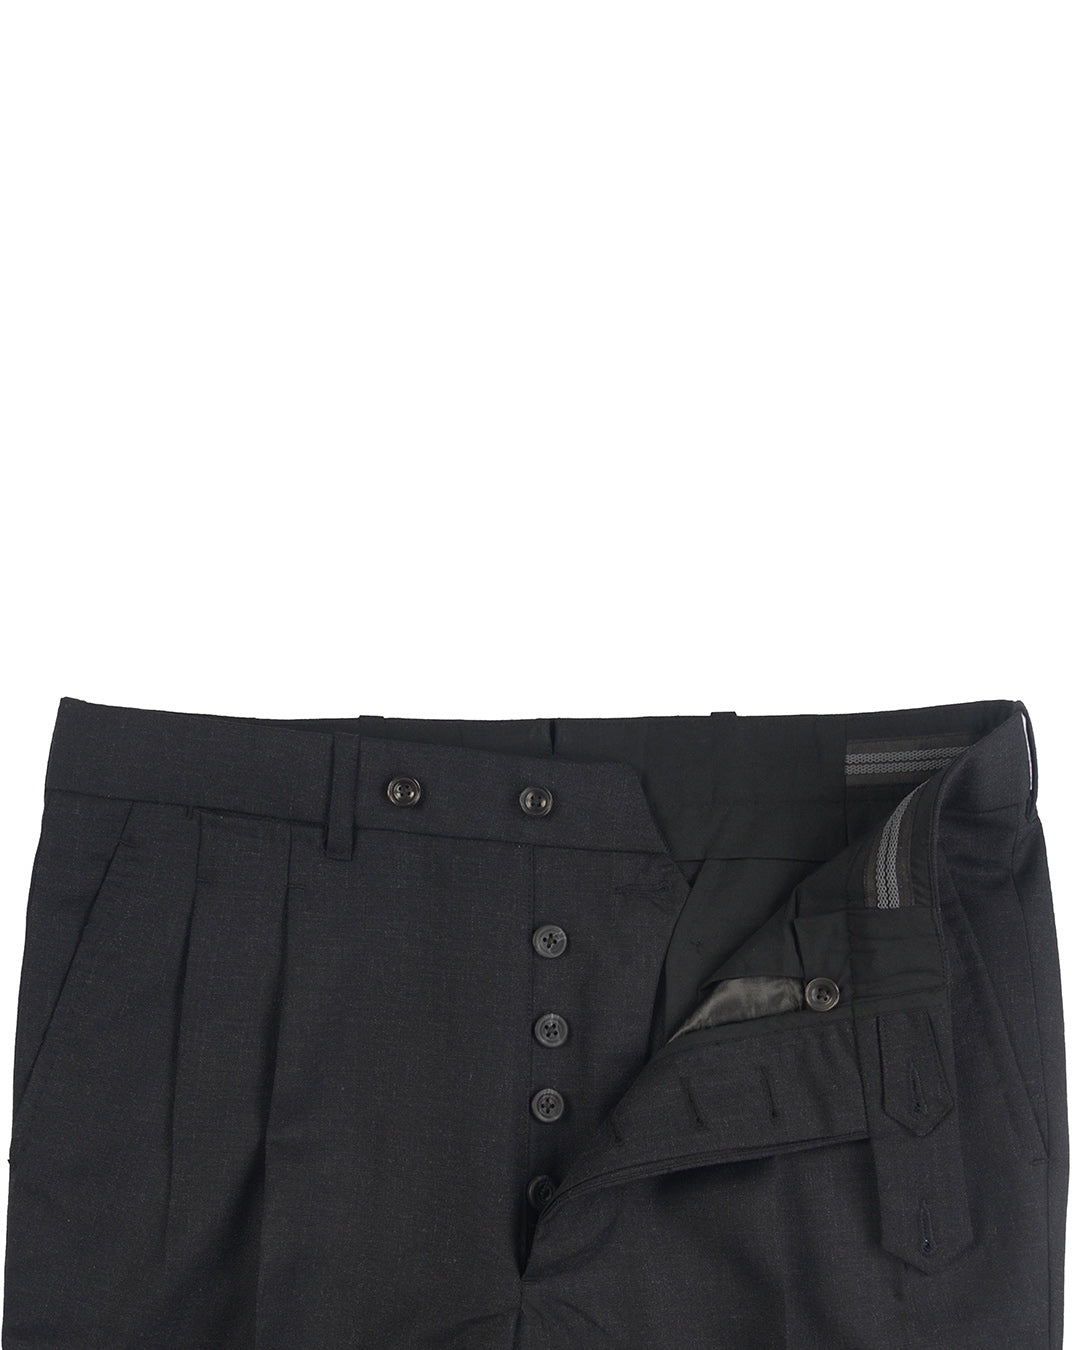 Dugdale Fine Worsted Pant- Charcoal Plain